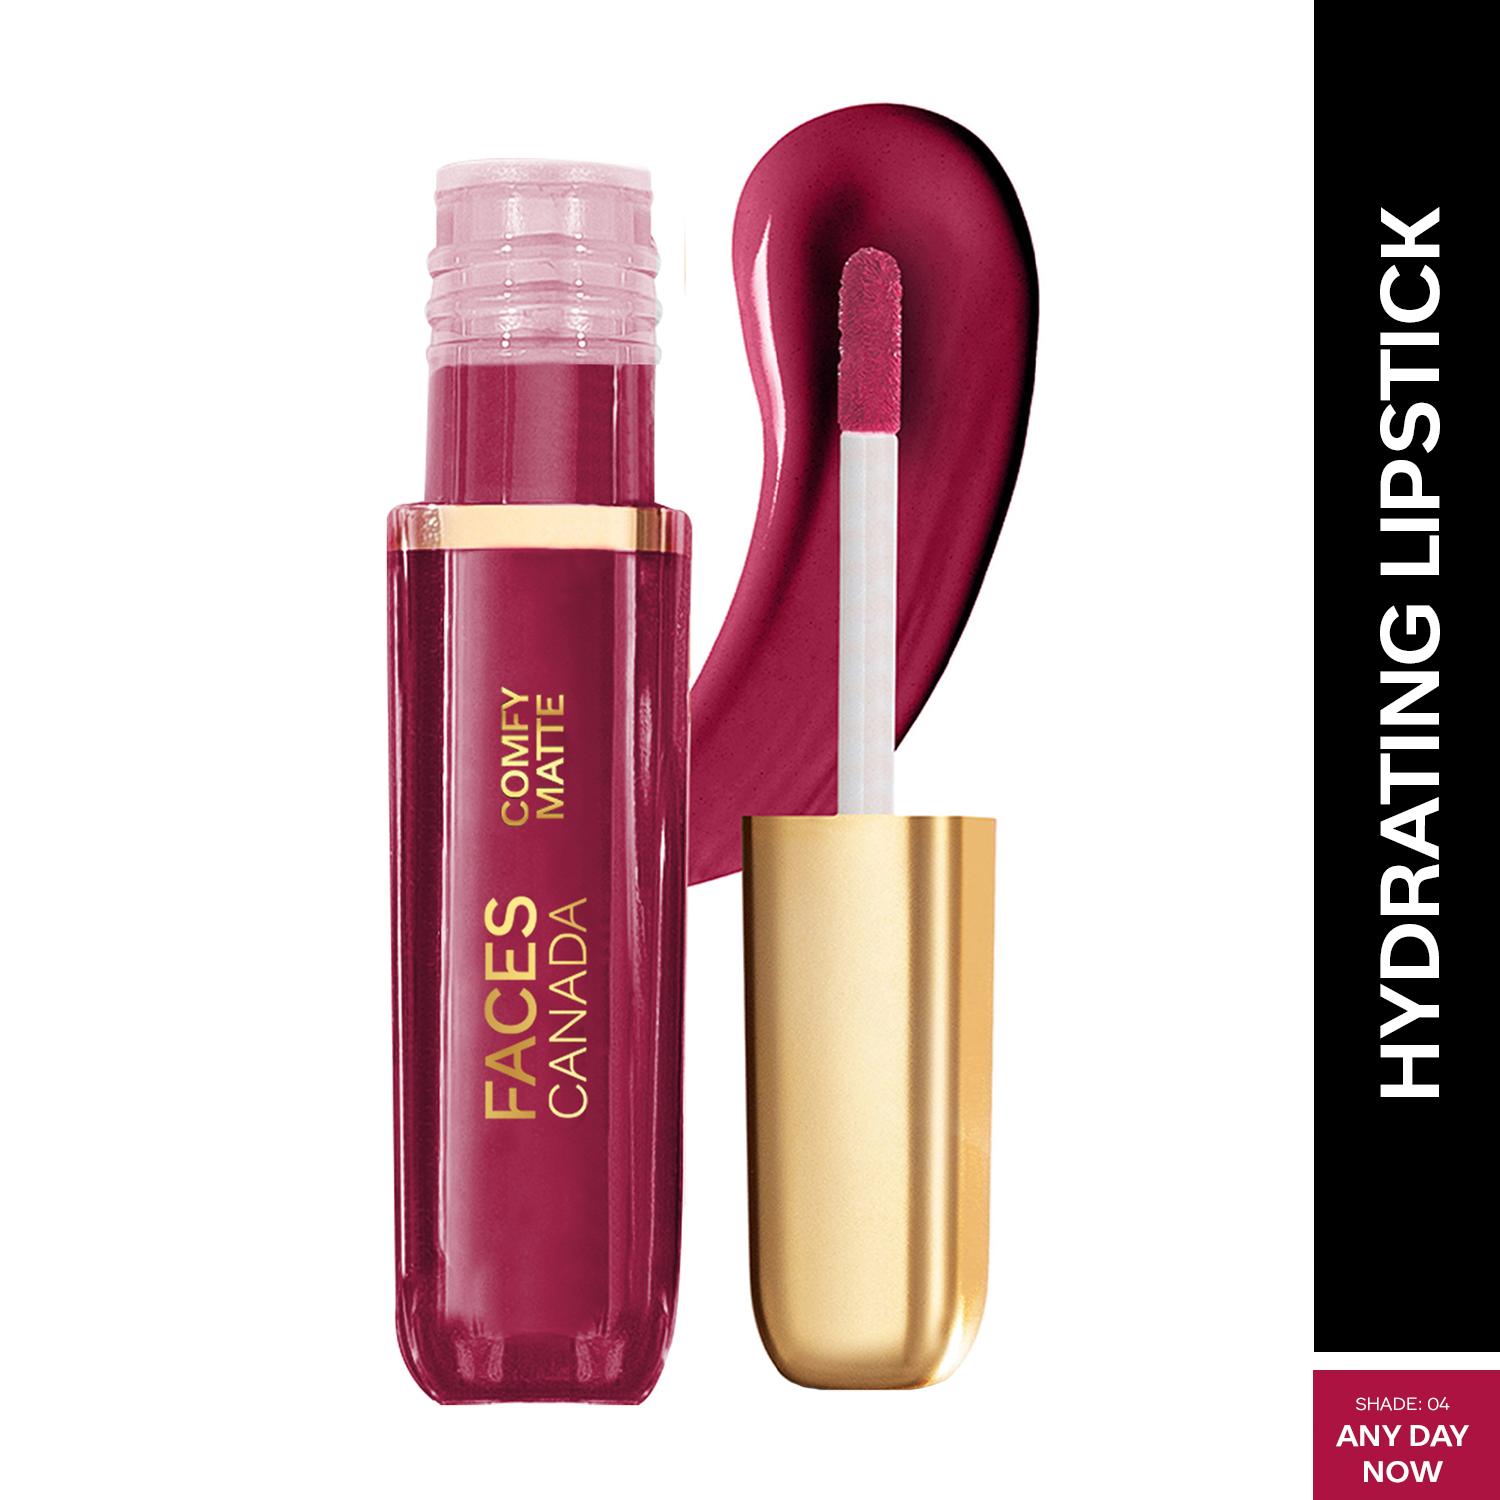 Faces Canada | Faces Canada Comfy Matte Liquid Lipstick, 10HR Stay, No Dryness - Any Day Now 04 (3 ml)